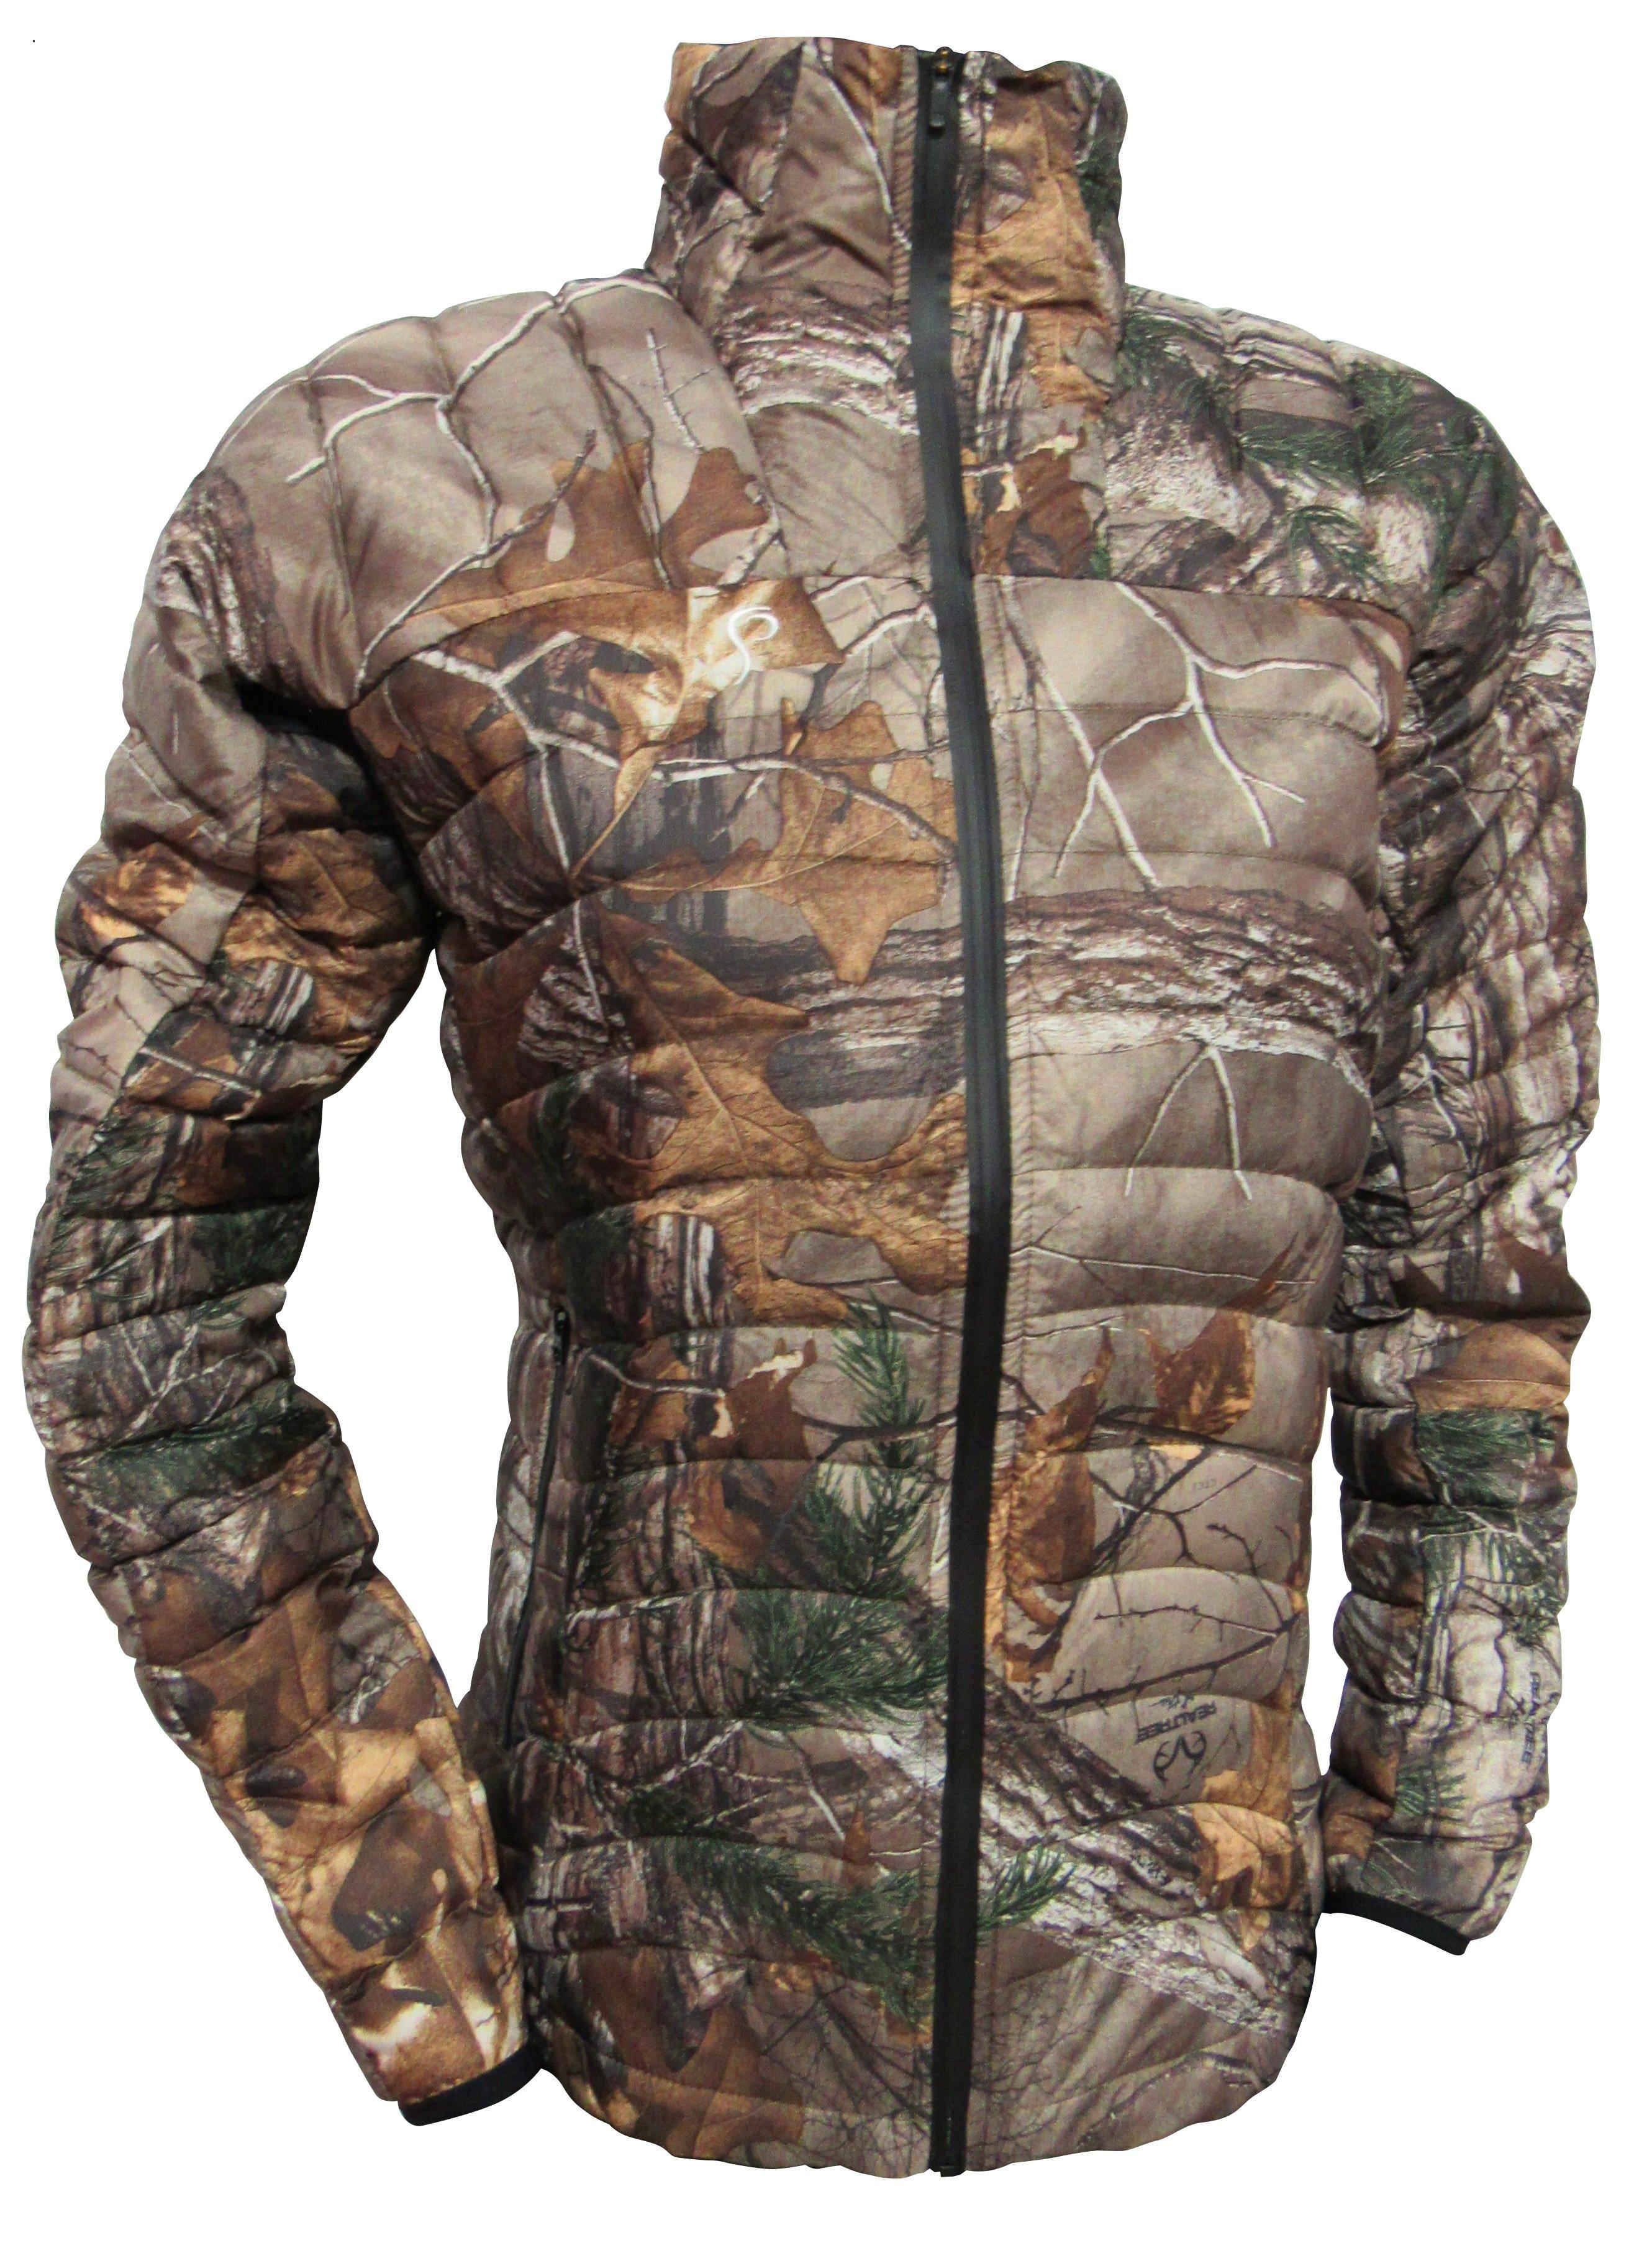 Prois Archtach Down Jacket in Realtree Xtra and MAX-1